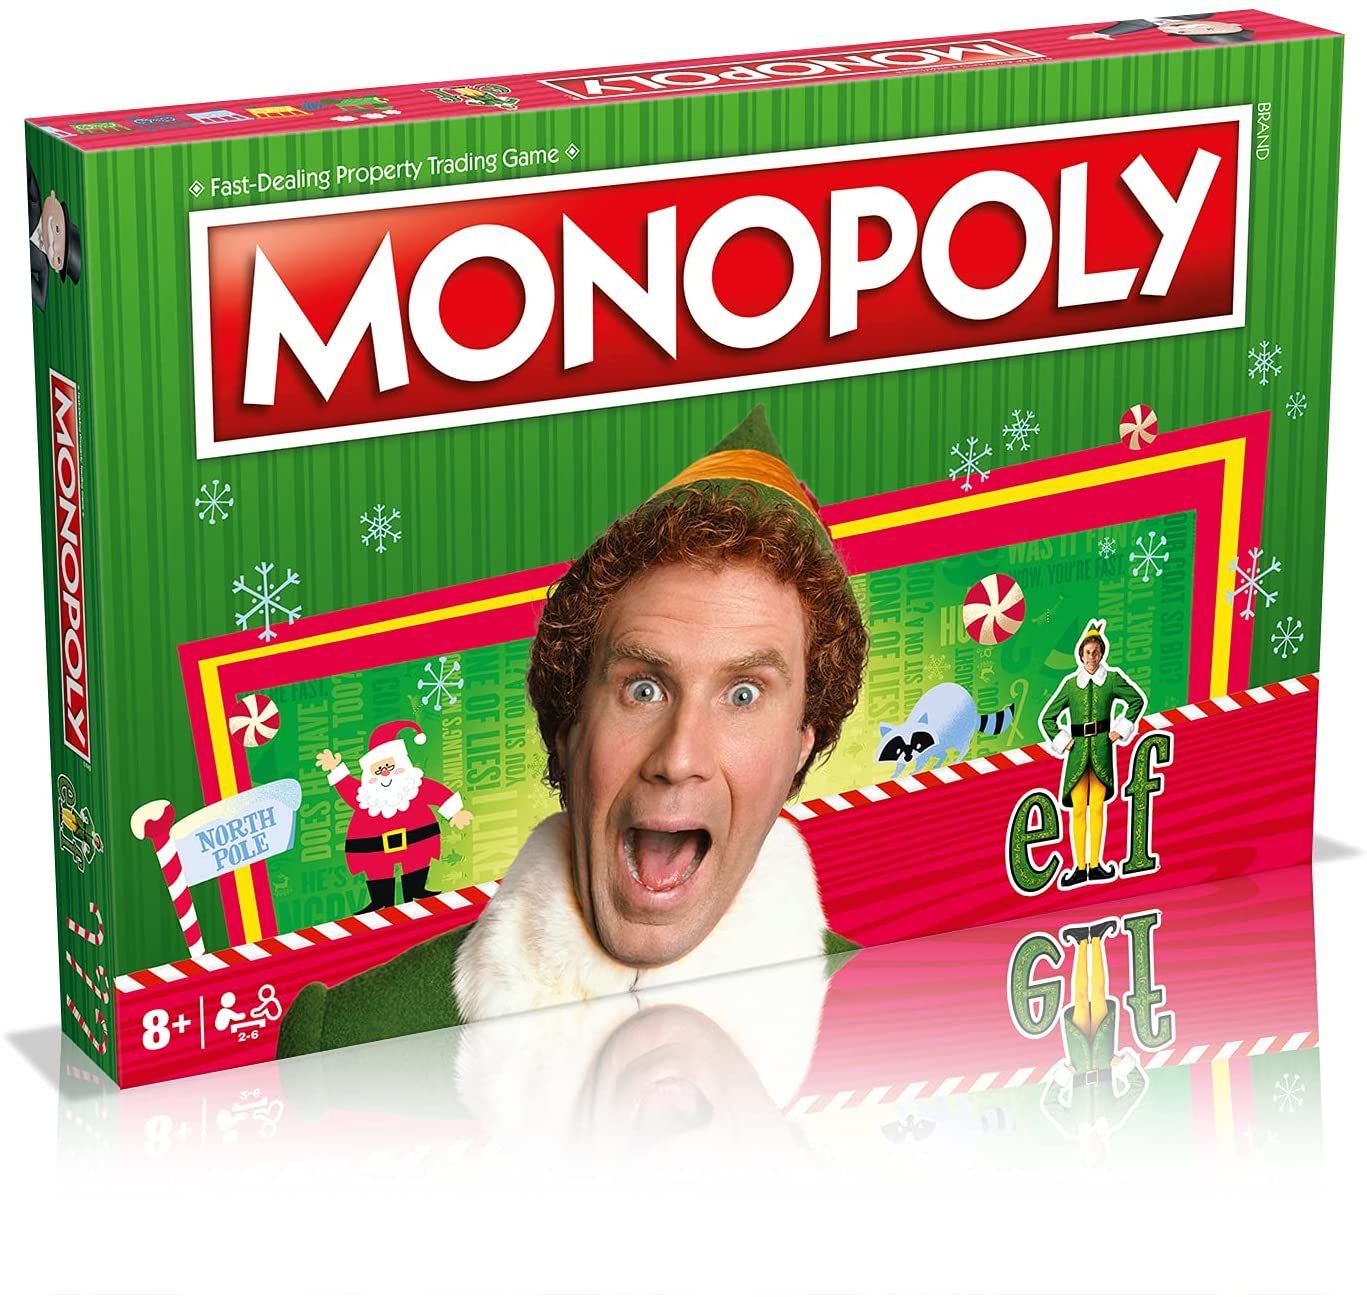 Elf Monopoly the board game is now available to purchase from Phillips Toys on pre-order! Stock is due to land on the 9th of September.